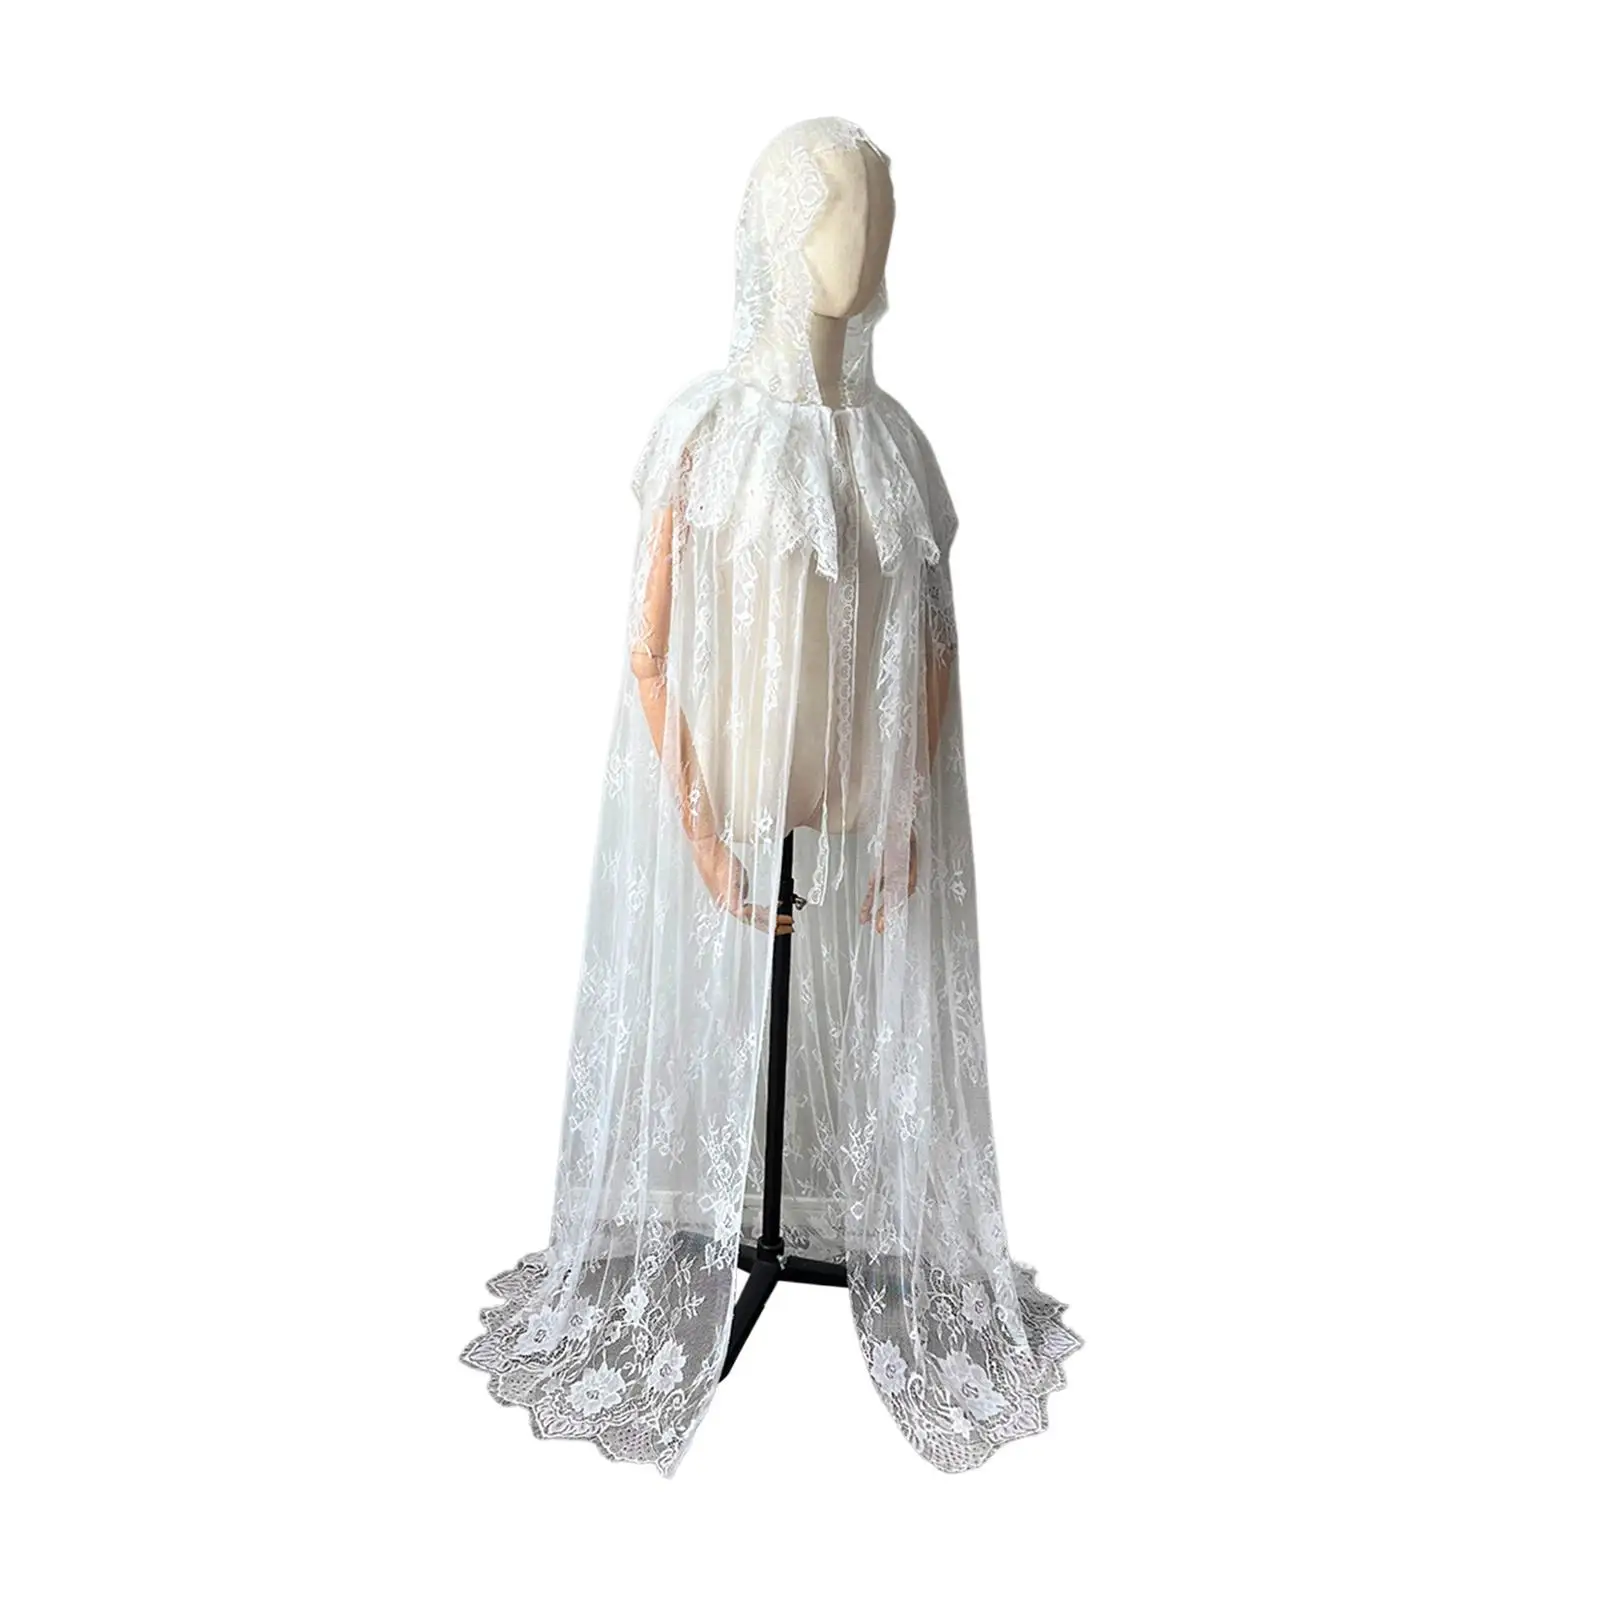 Hooded Cloak Long Cape Halloween Costume Graceful Lace Cape for Ball Stage Performances Medieval Costumes Masquerade Dress up